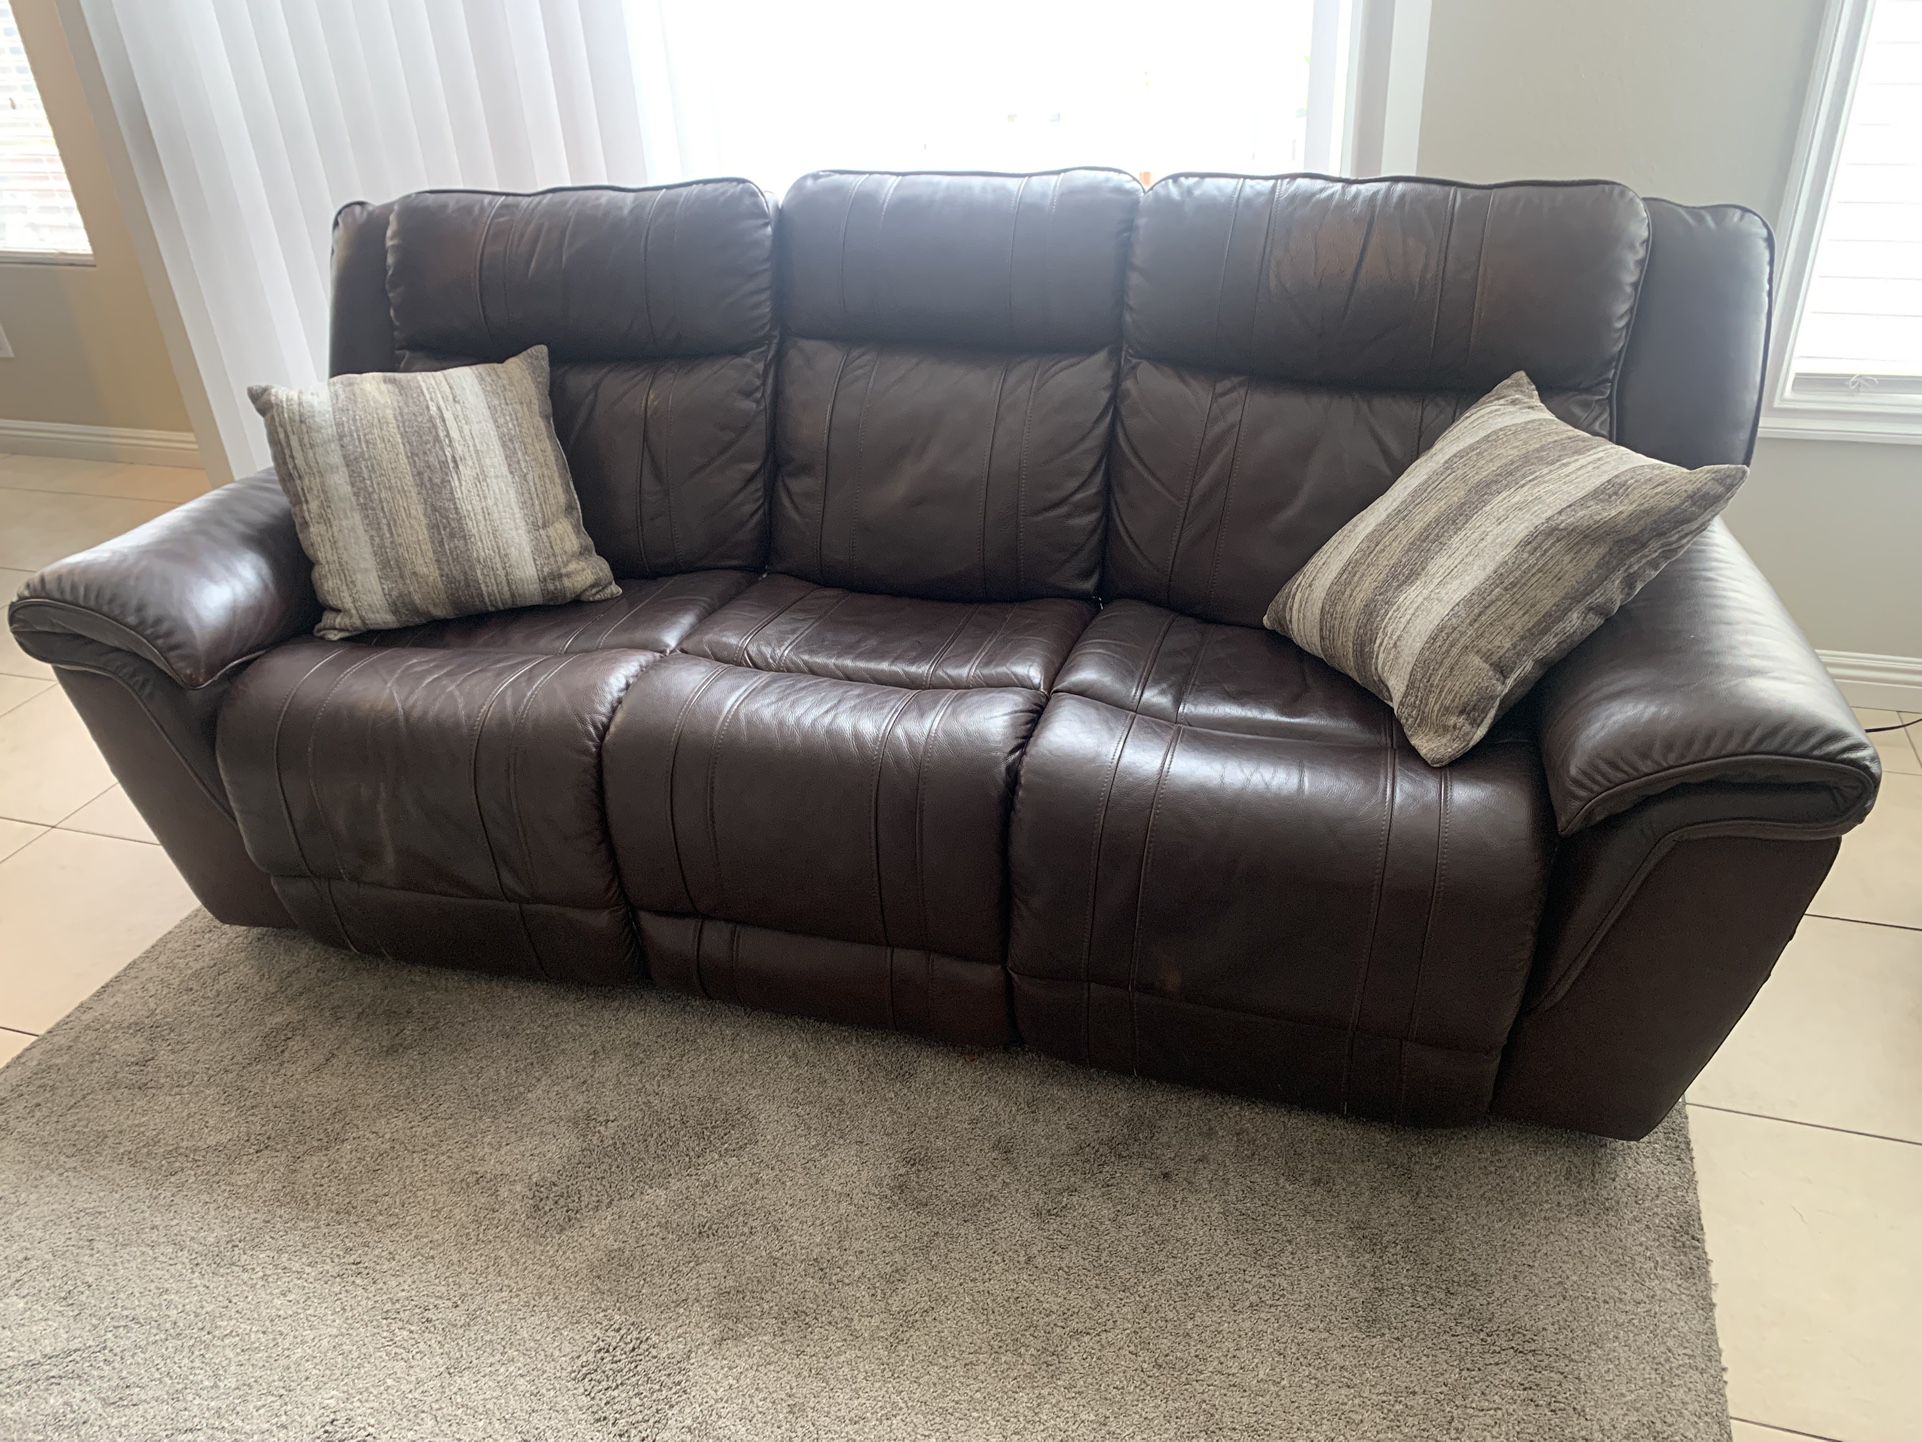 Brown Leather Couch with Double Recliner - Good Condition